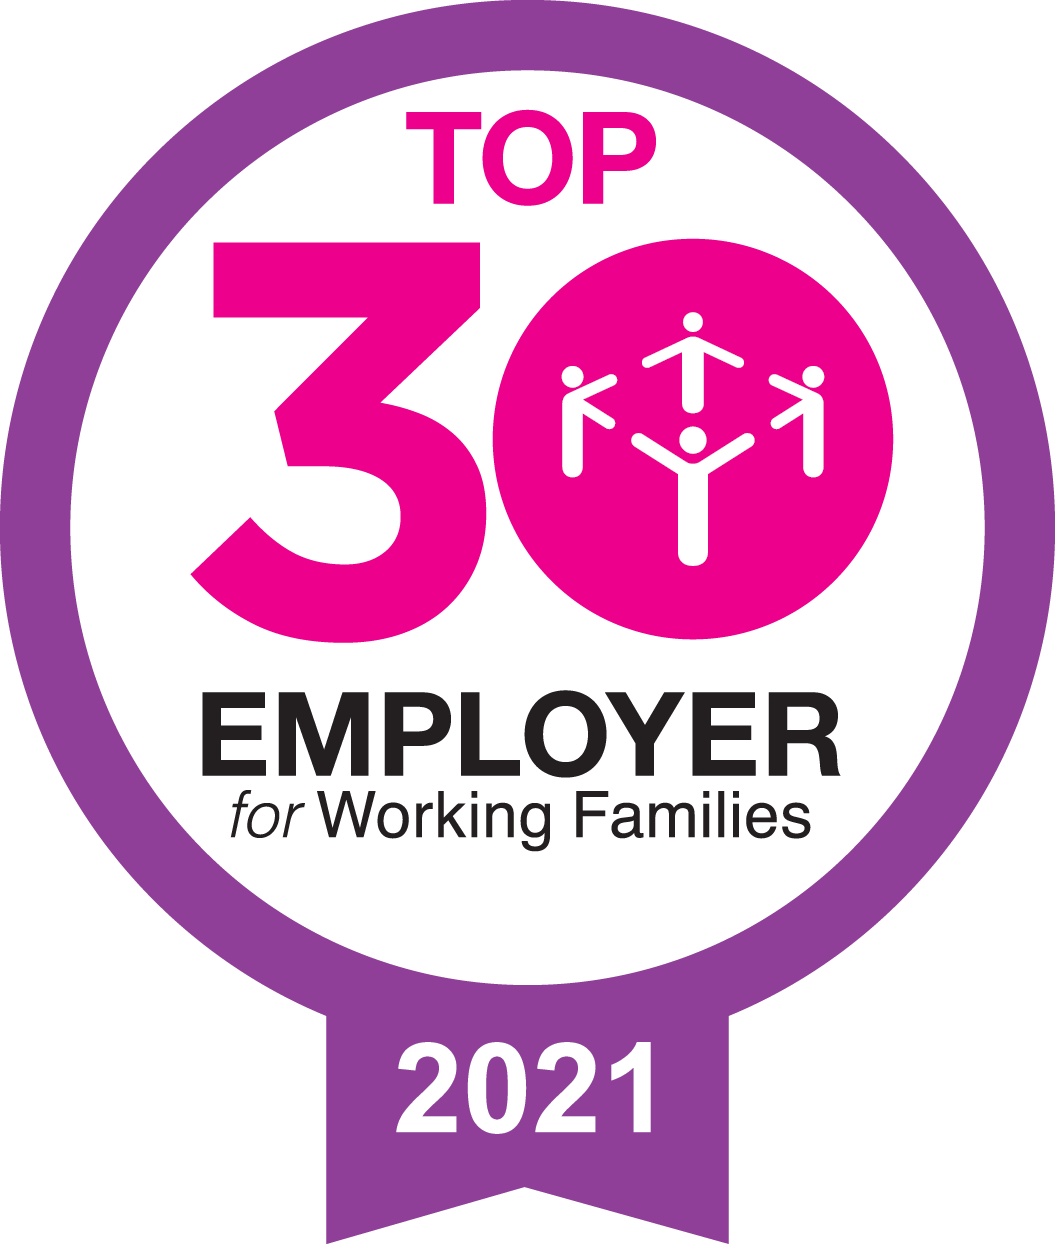 Top 30 Employer for Working Families 2021